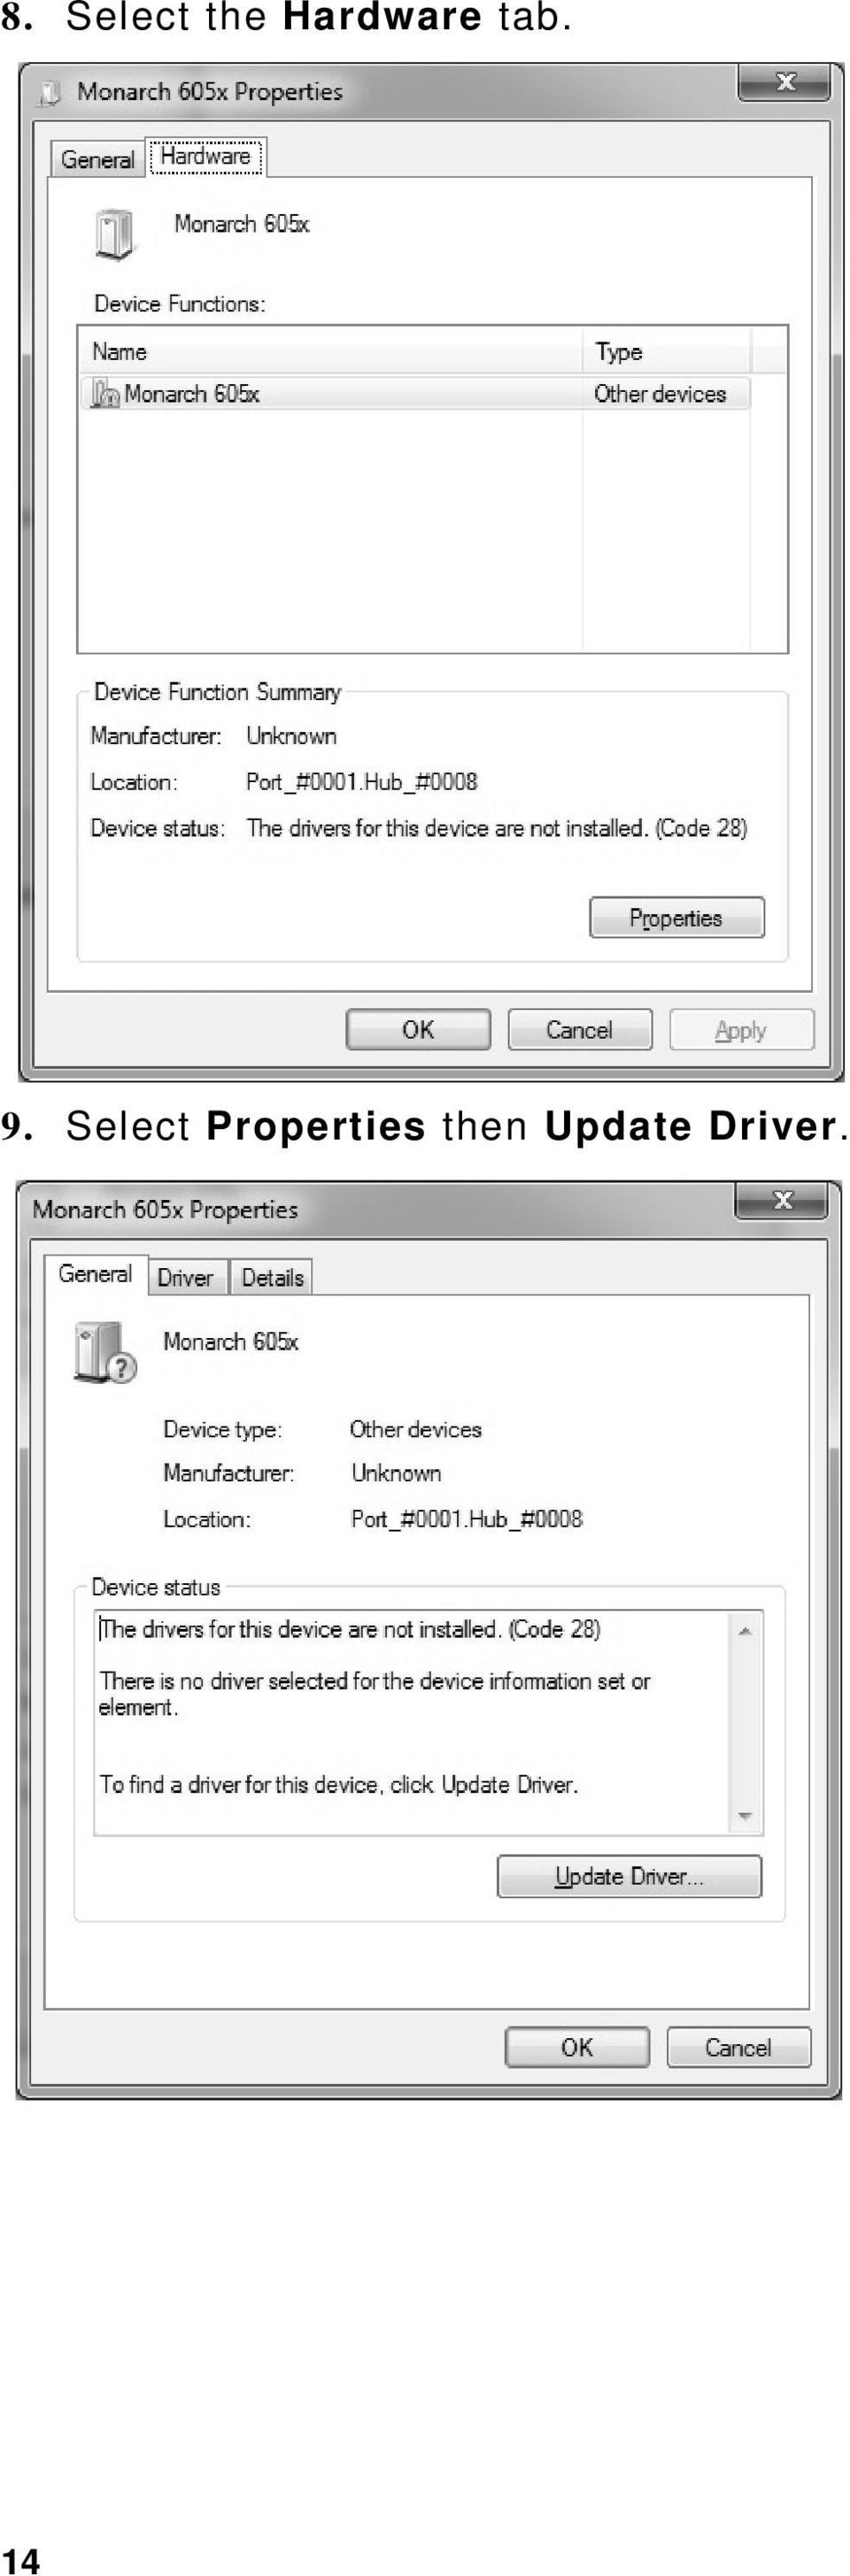 Download kaba usb devices driver windows 7